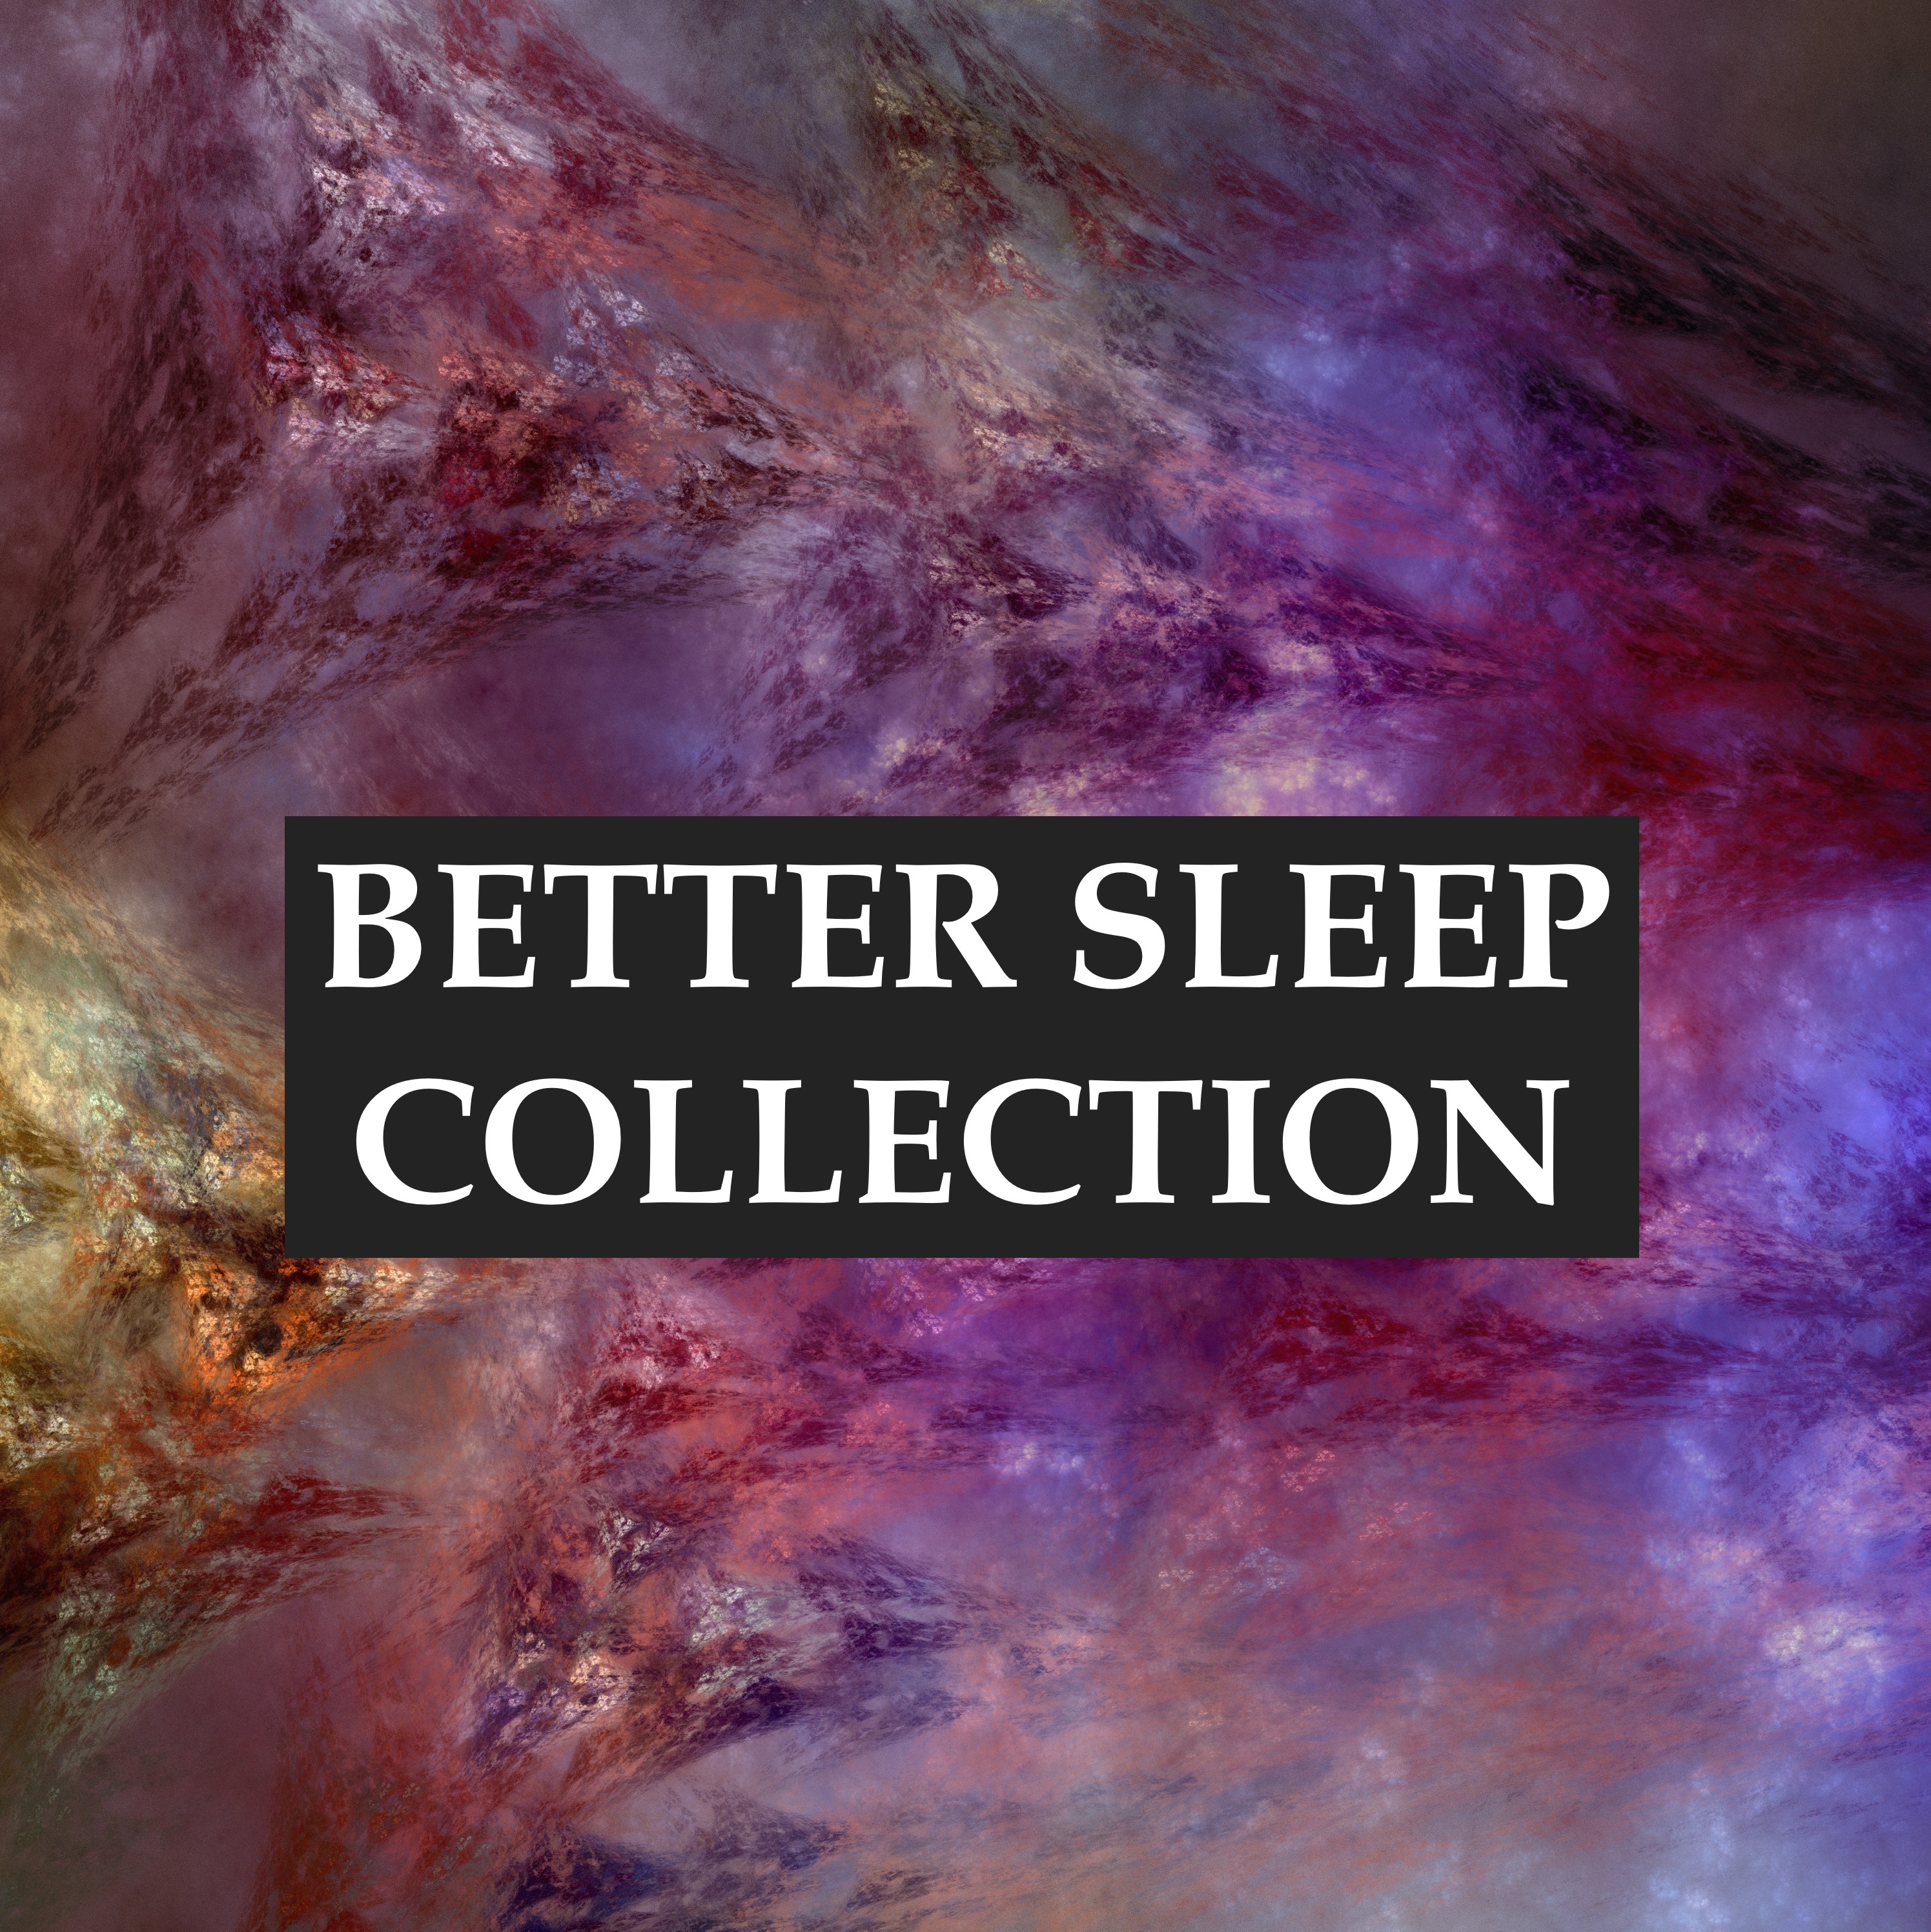 Better Sleep Collection - Fall Asleep Faster and Deeper, Relieve Stress & Anxiety, Help with Meditation & Yoga, and Achieve Better Health Through Ultimate Relaxation